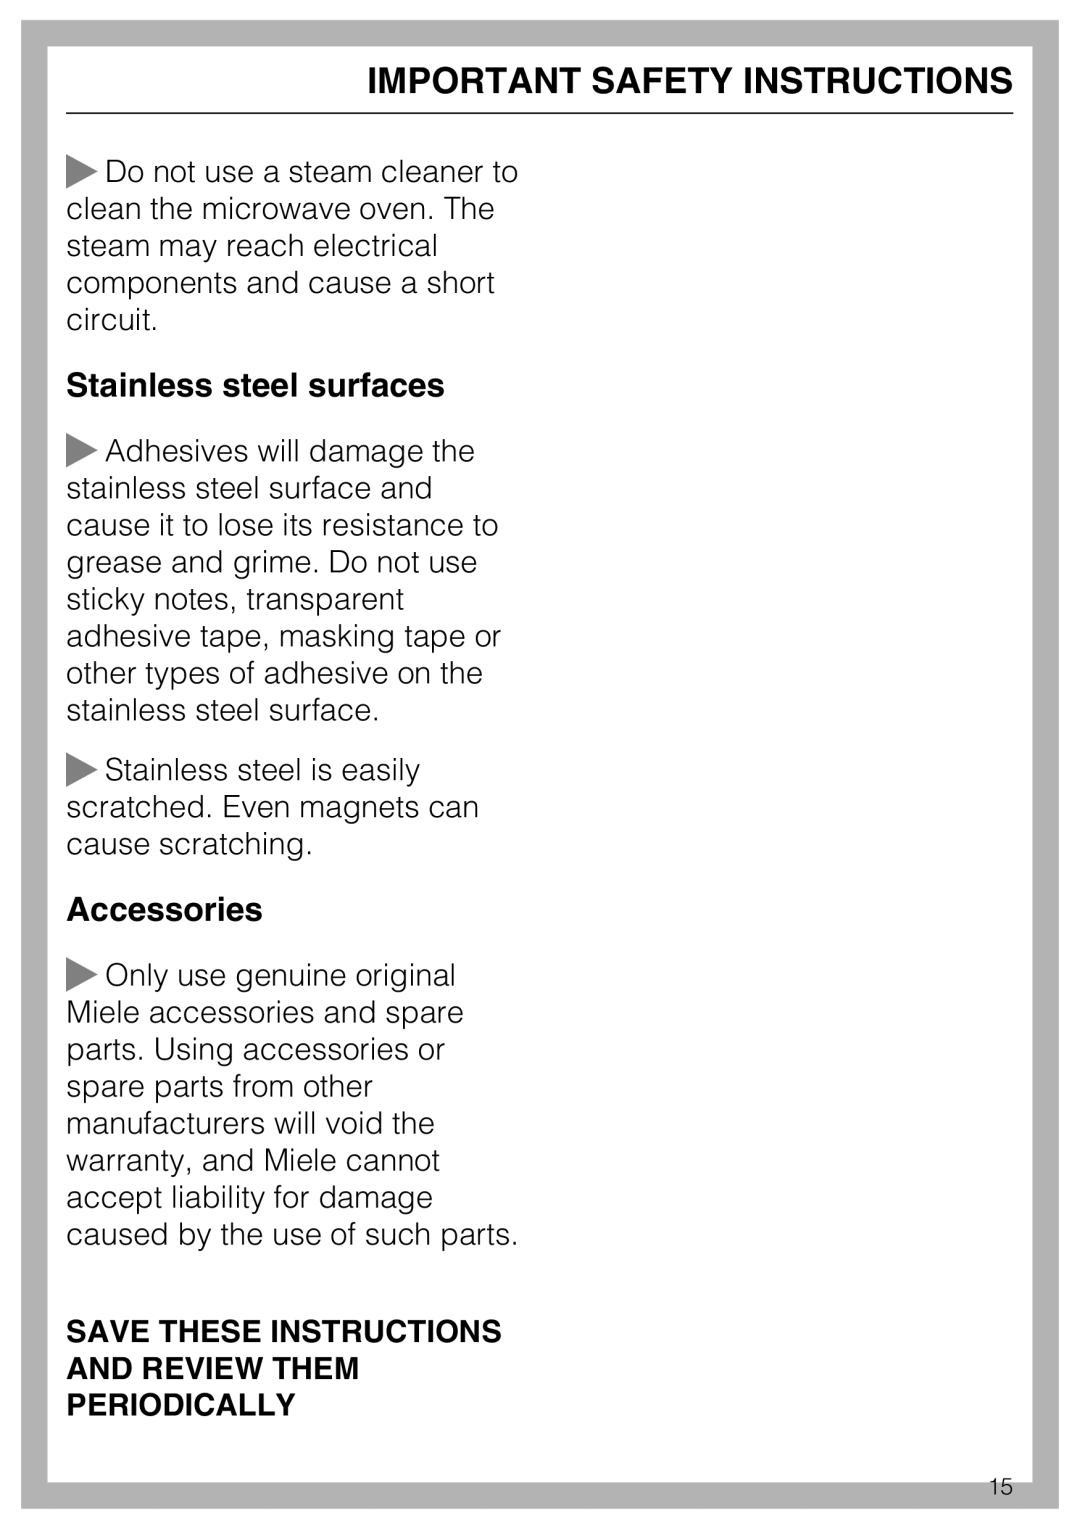 Miele 09 798 350 Stainless steel surfaces, Accessories, Save These Instructions And Review Them, Periodically 